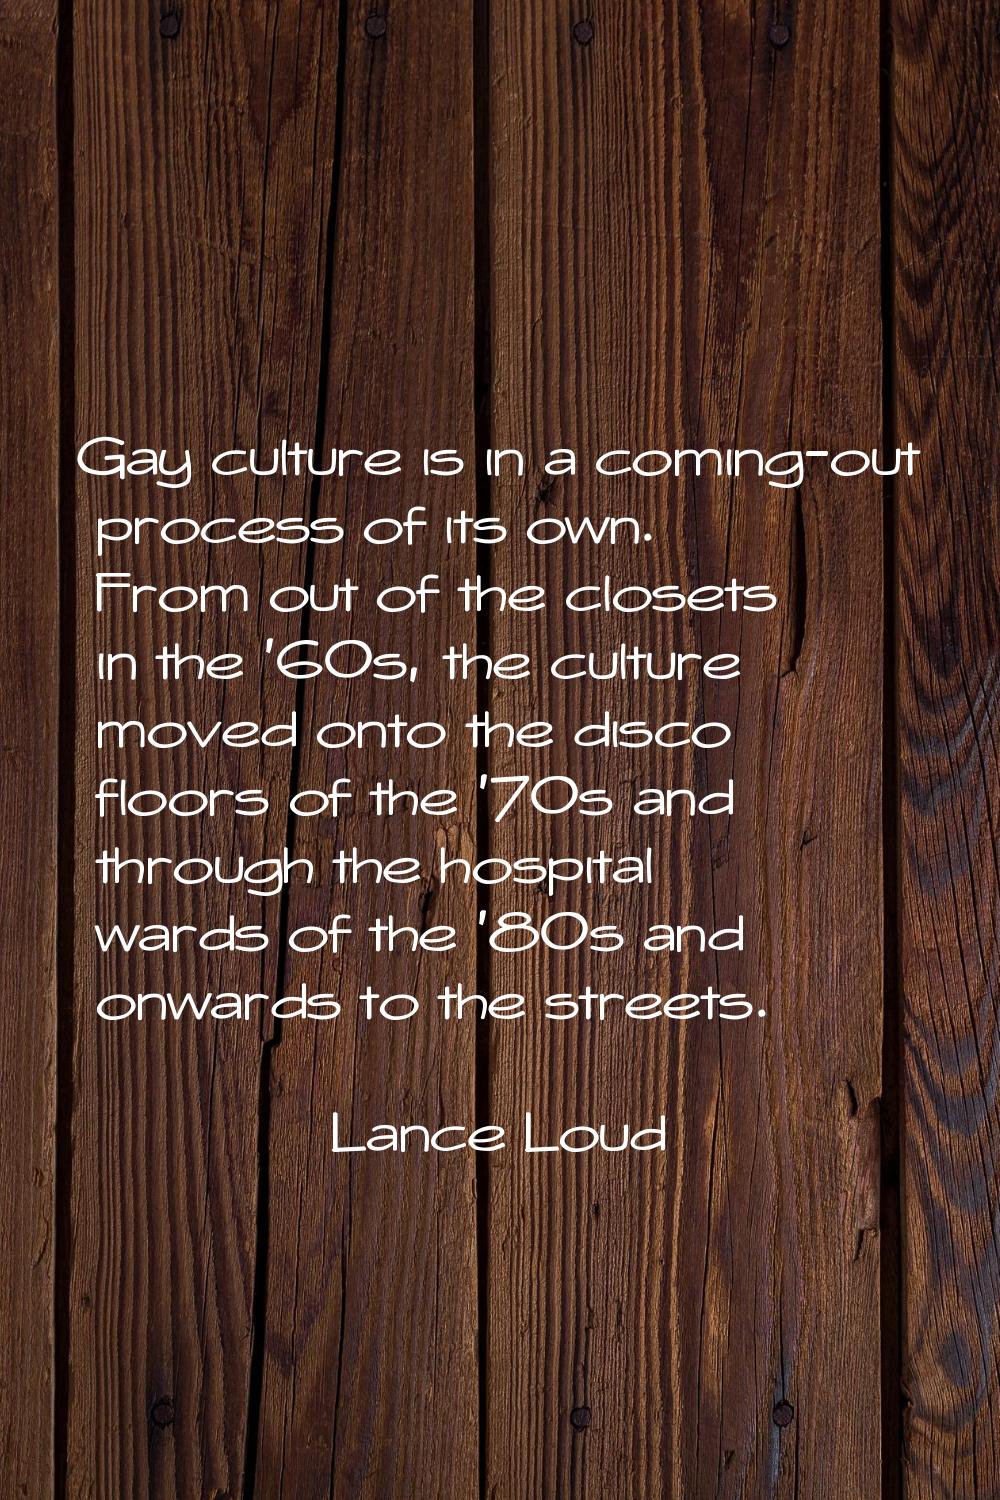 Gay culture is in a coming-out process of its own. From out of the closets in the '60s, the culture